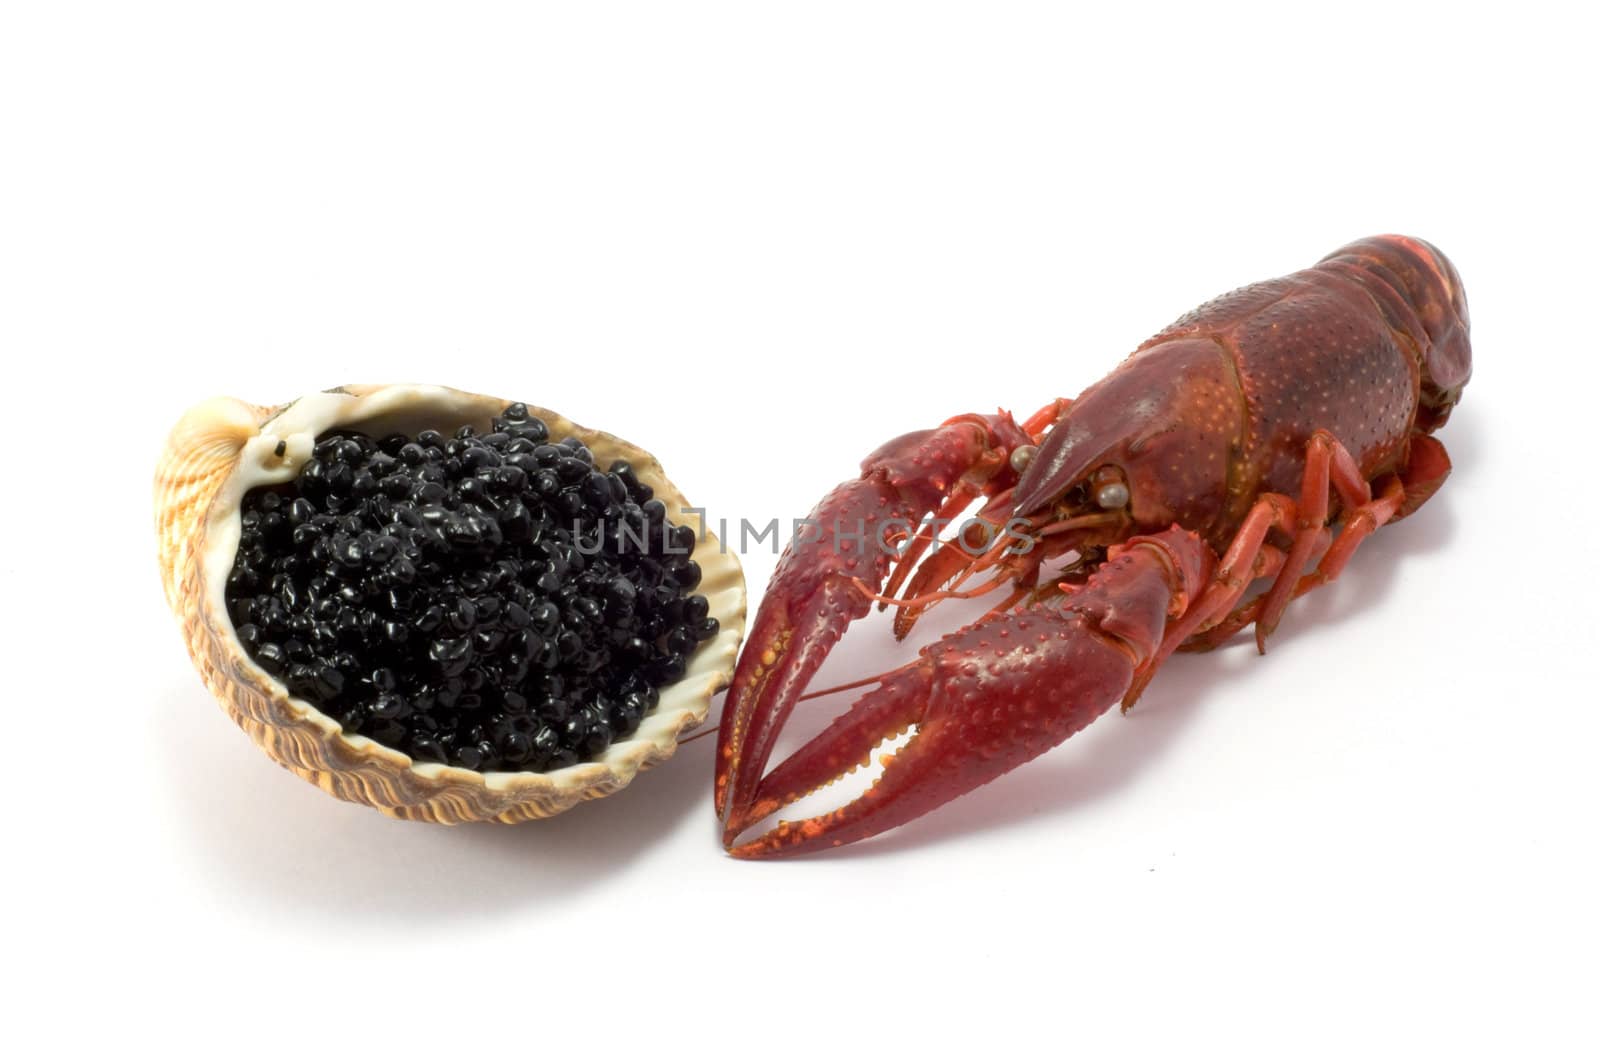 Shot of caviar isolated on white background